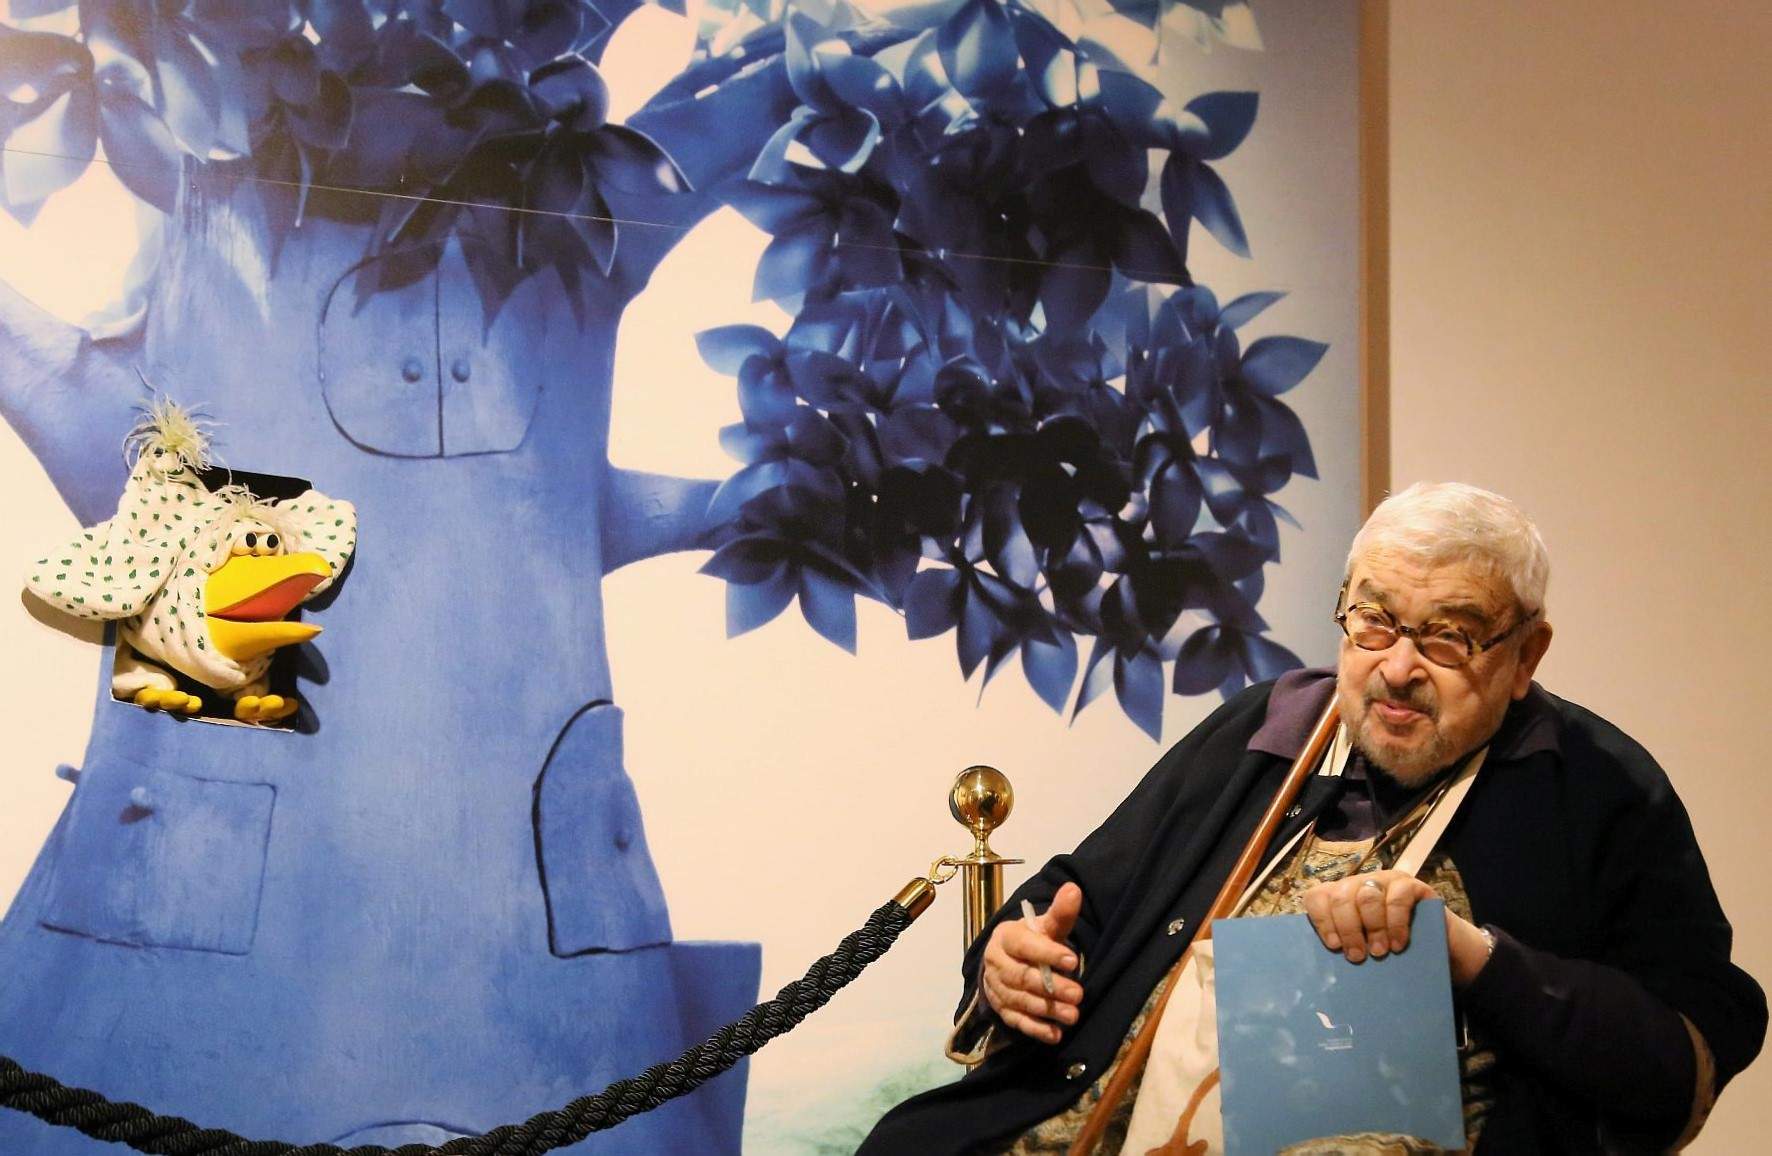 In Romagna an exhibition on Tinin Mantegazza, great illustrator, father of DodÃ² of the Blue Tree and cabaret 